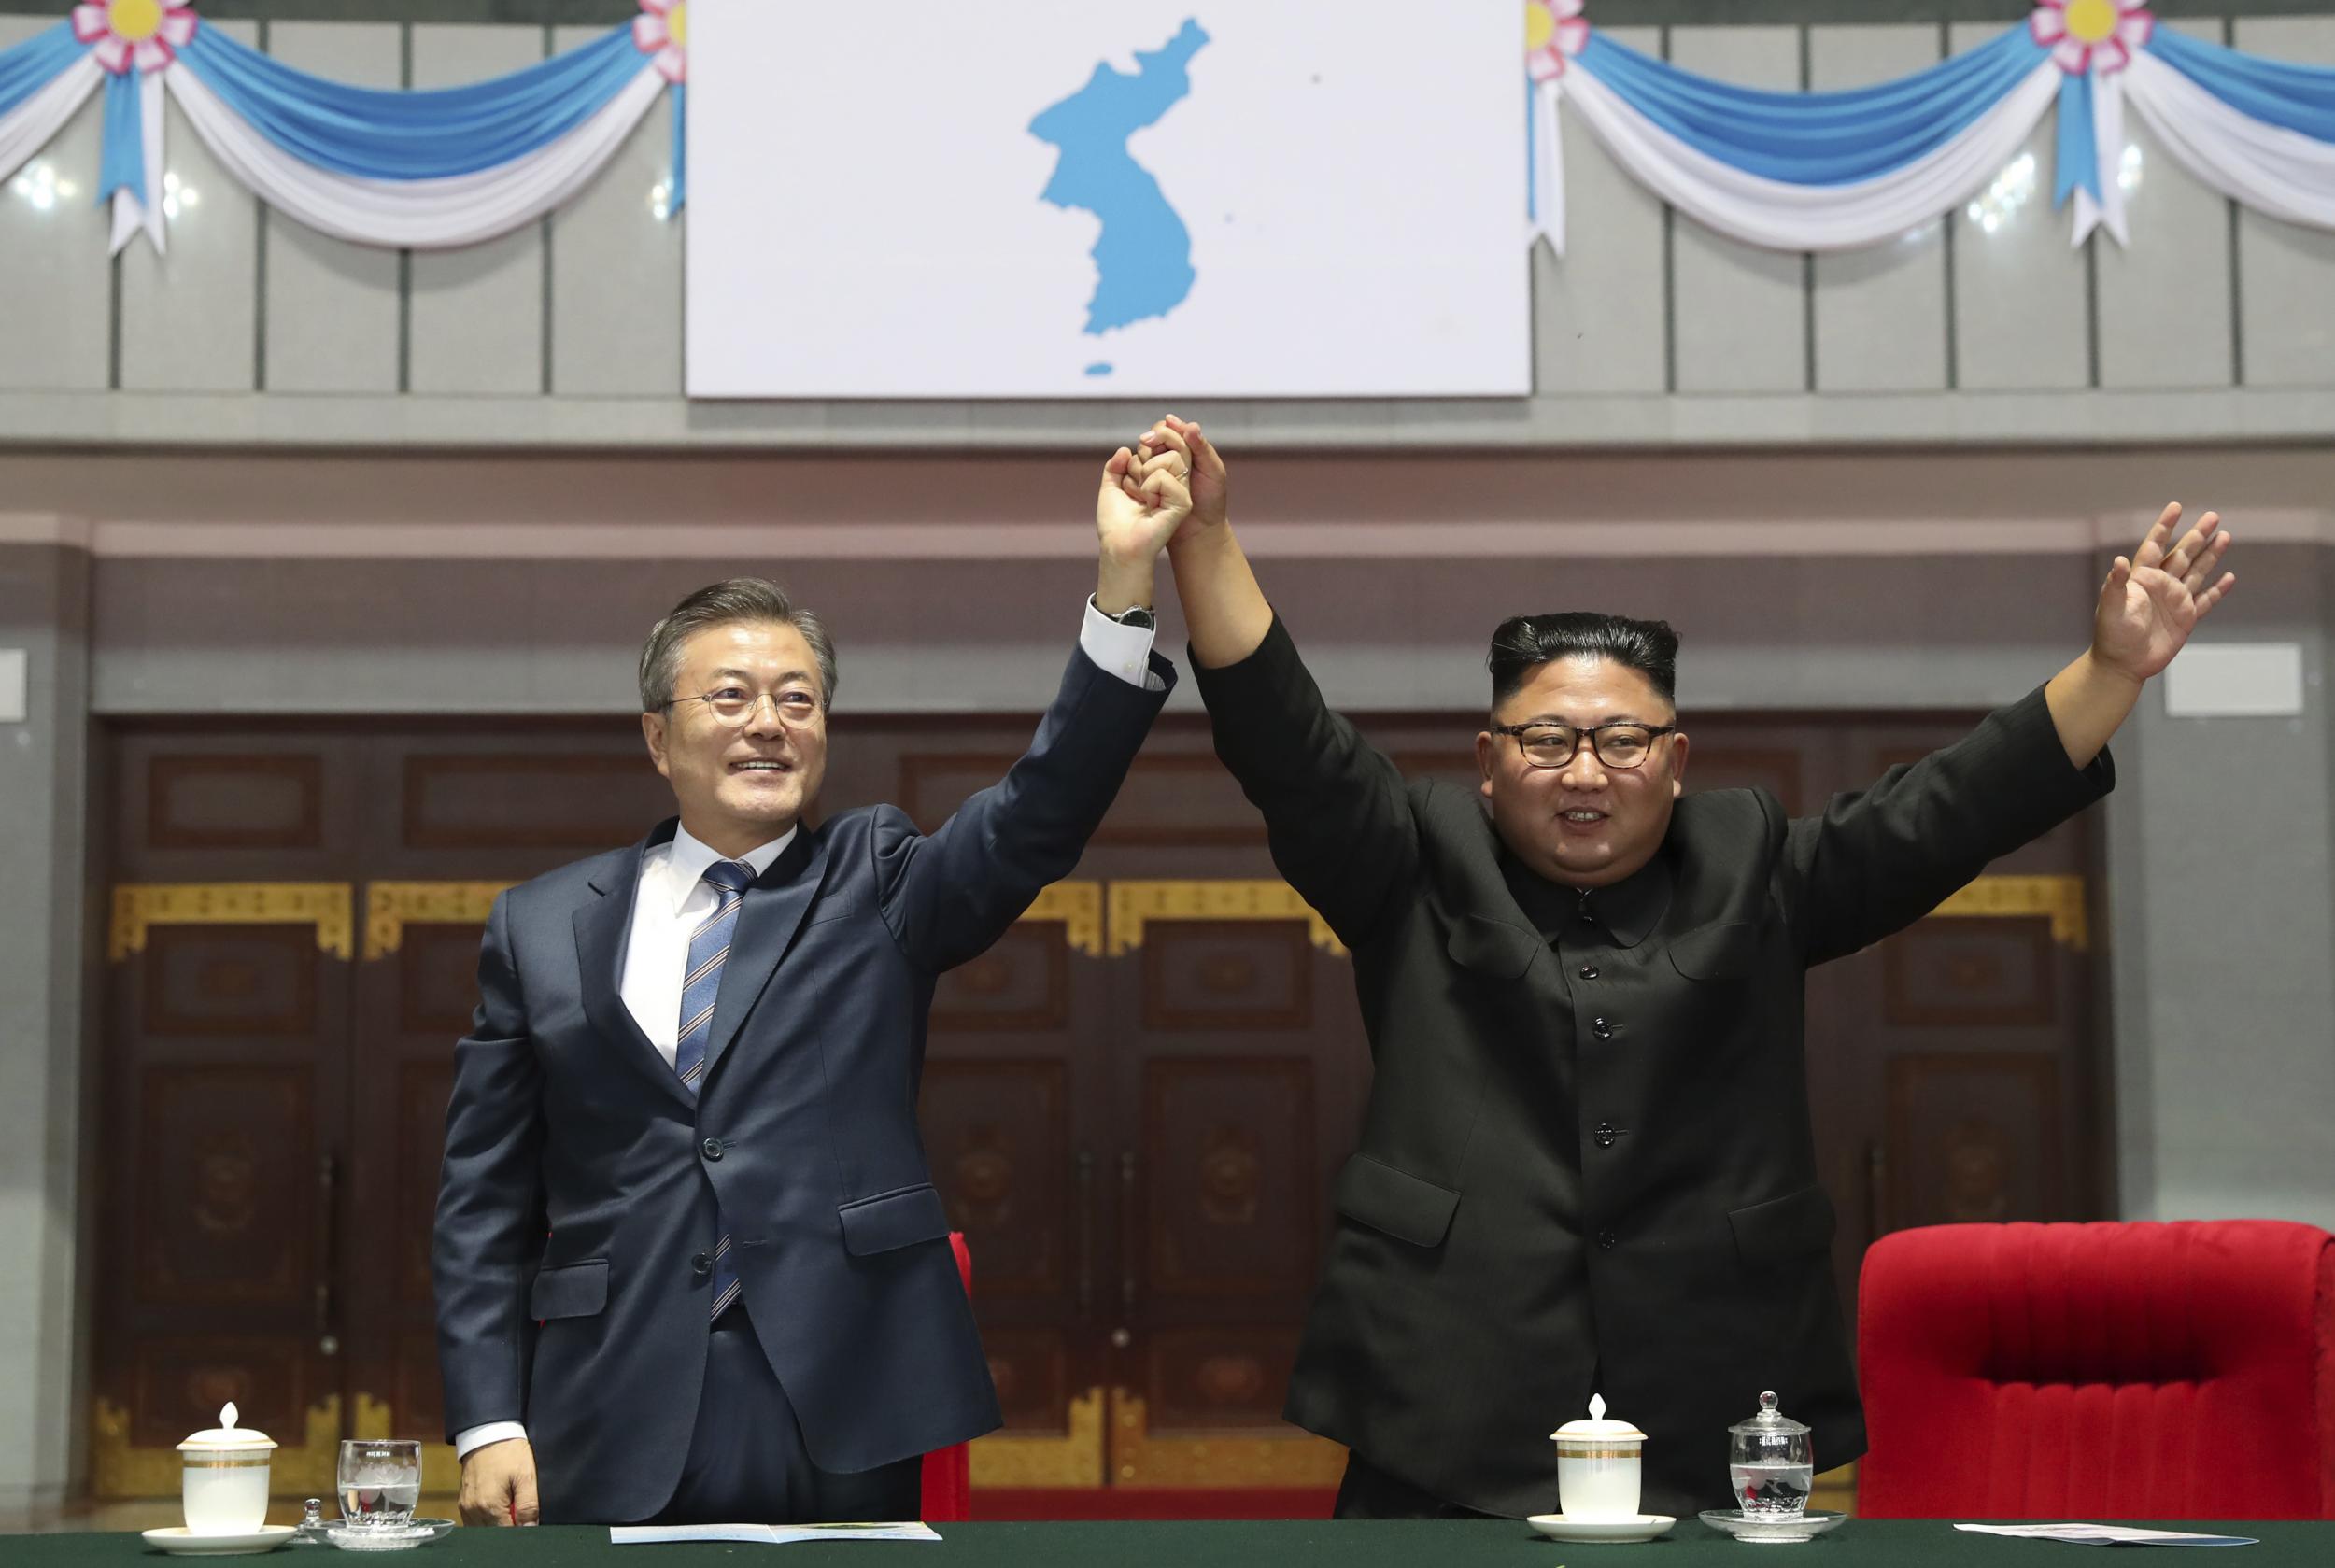 Heres A List Of Items In The Latest North And South Korea Peace Agreement The Independent 